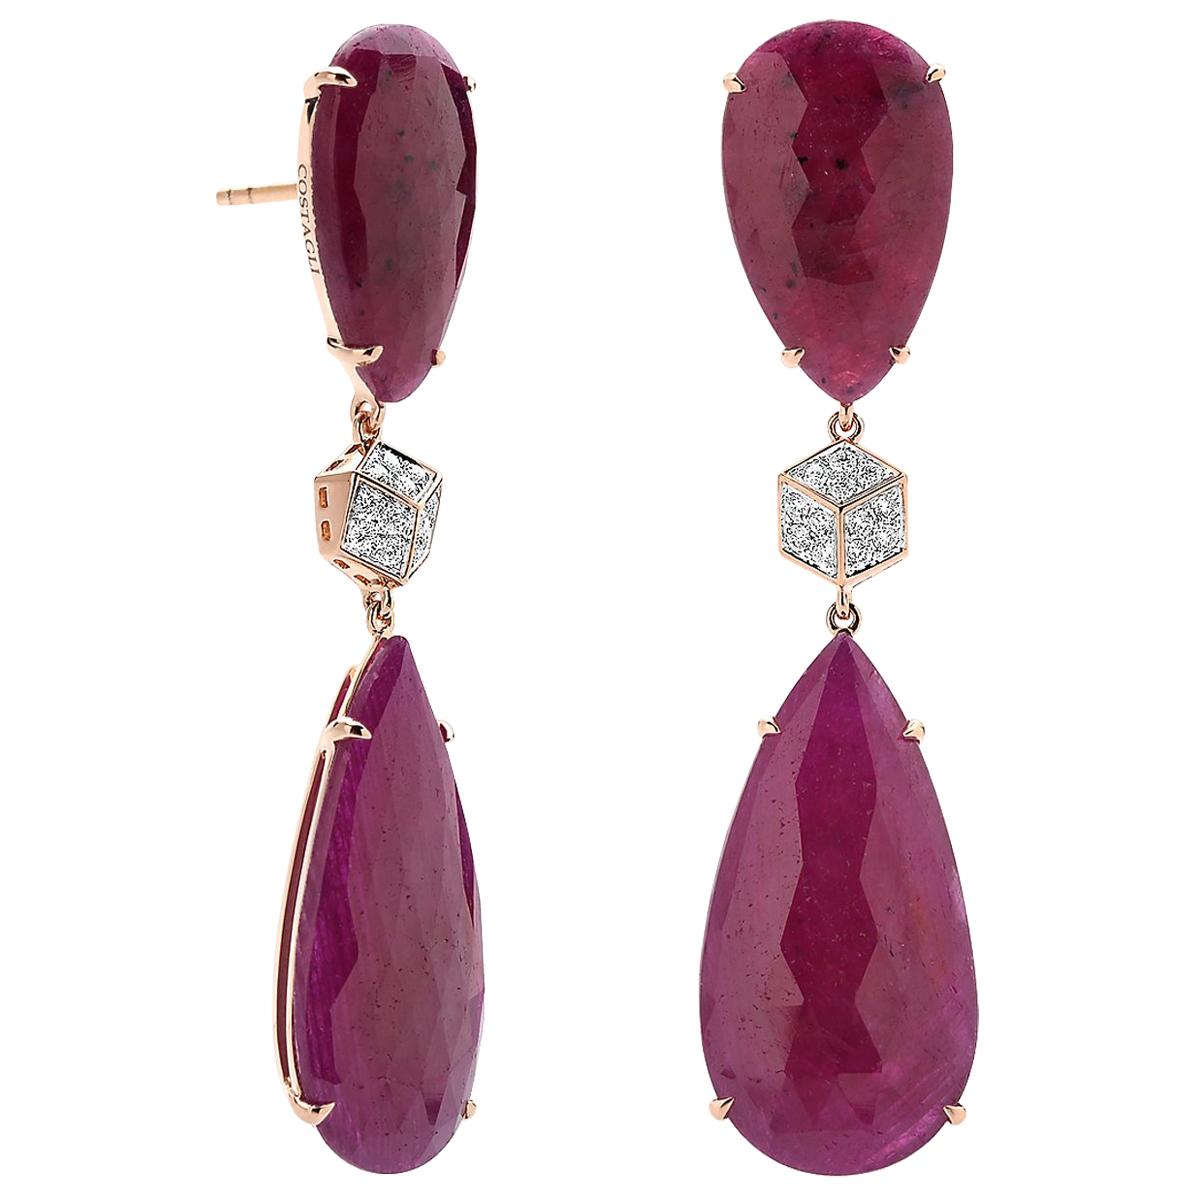 Paolo Costagli 37.57 Carat Ruby and Diamond Earrings in 18 Karat Rose Gold For Sale